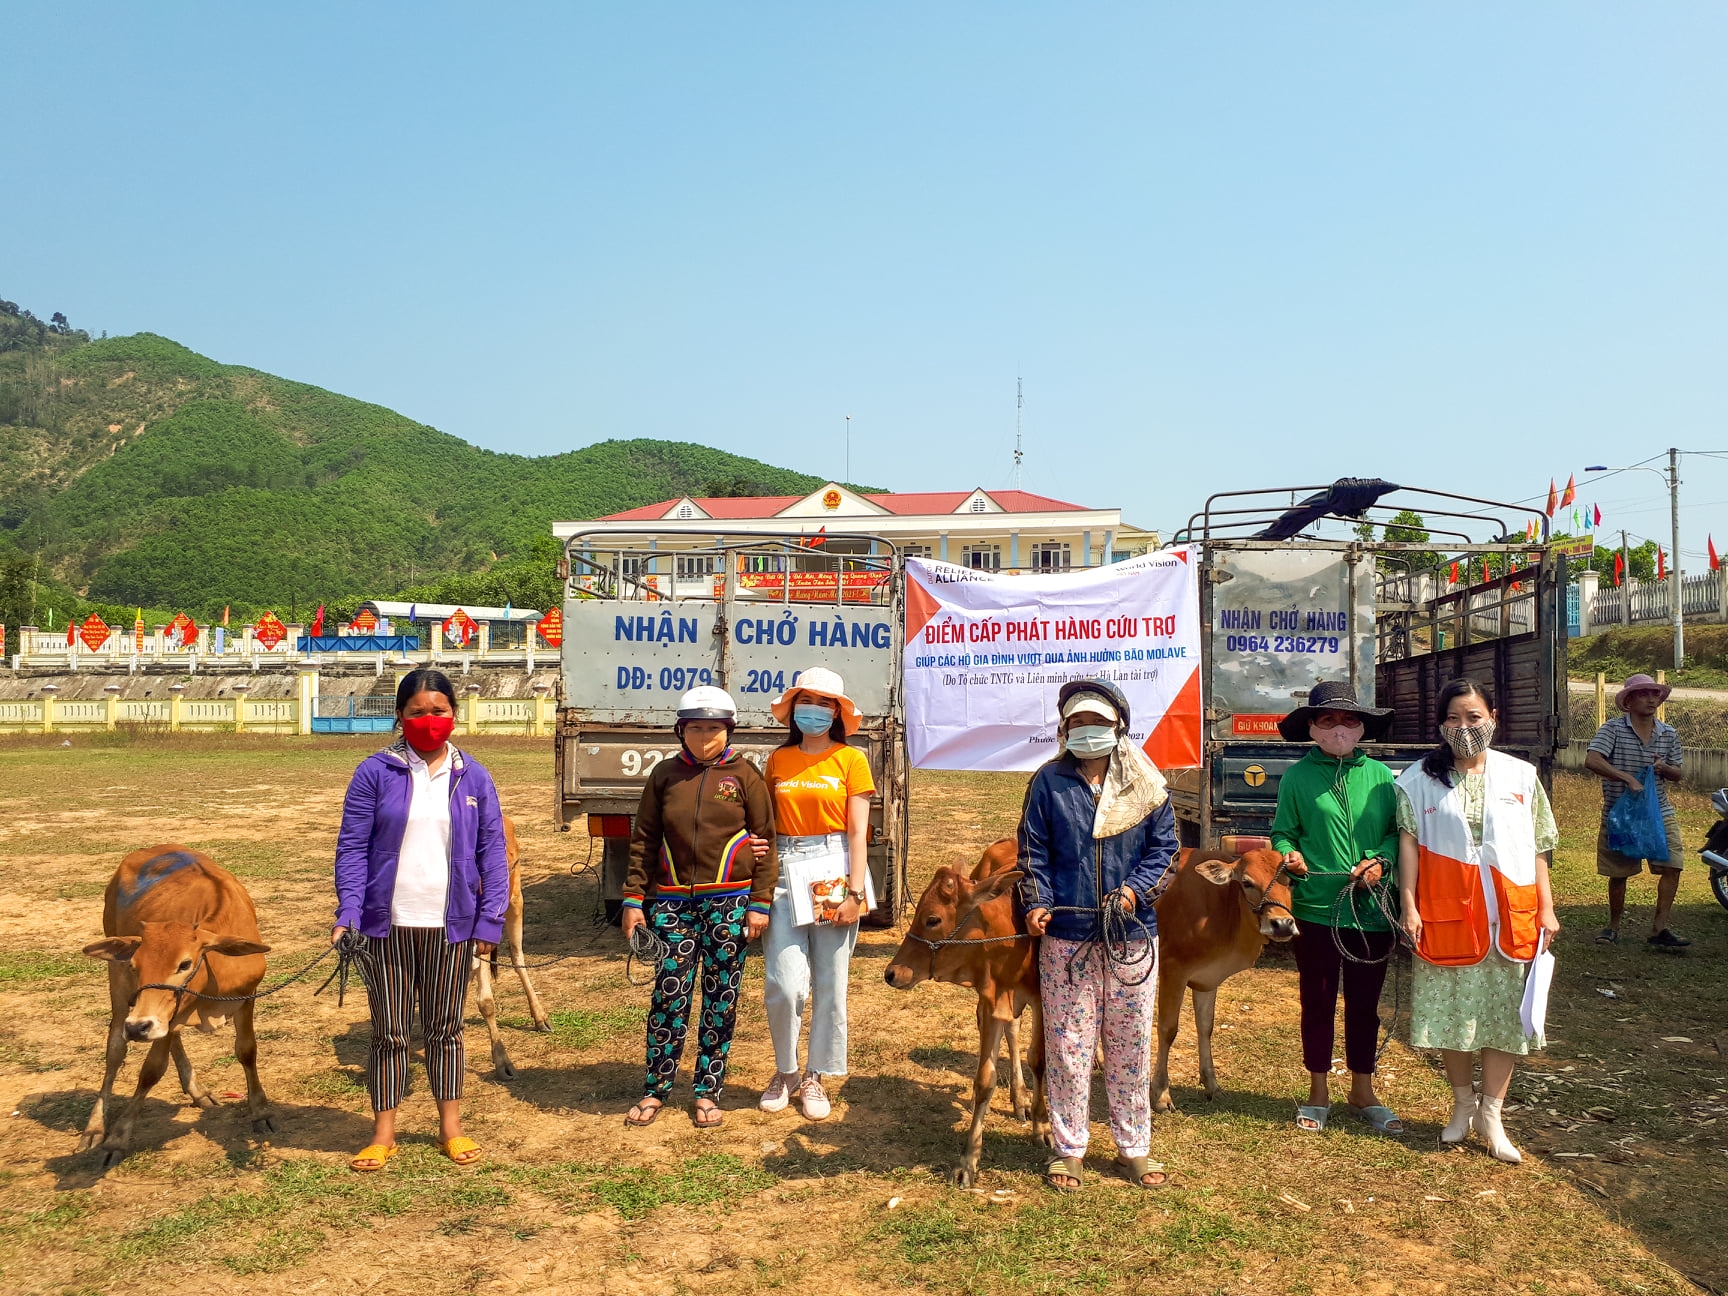 Breeding cows handed over to disaster–affected households in Quang Nam Province